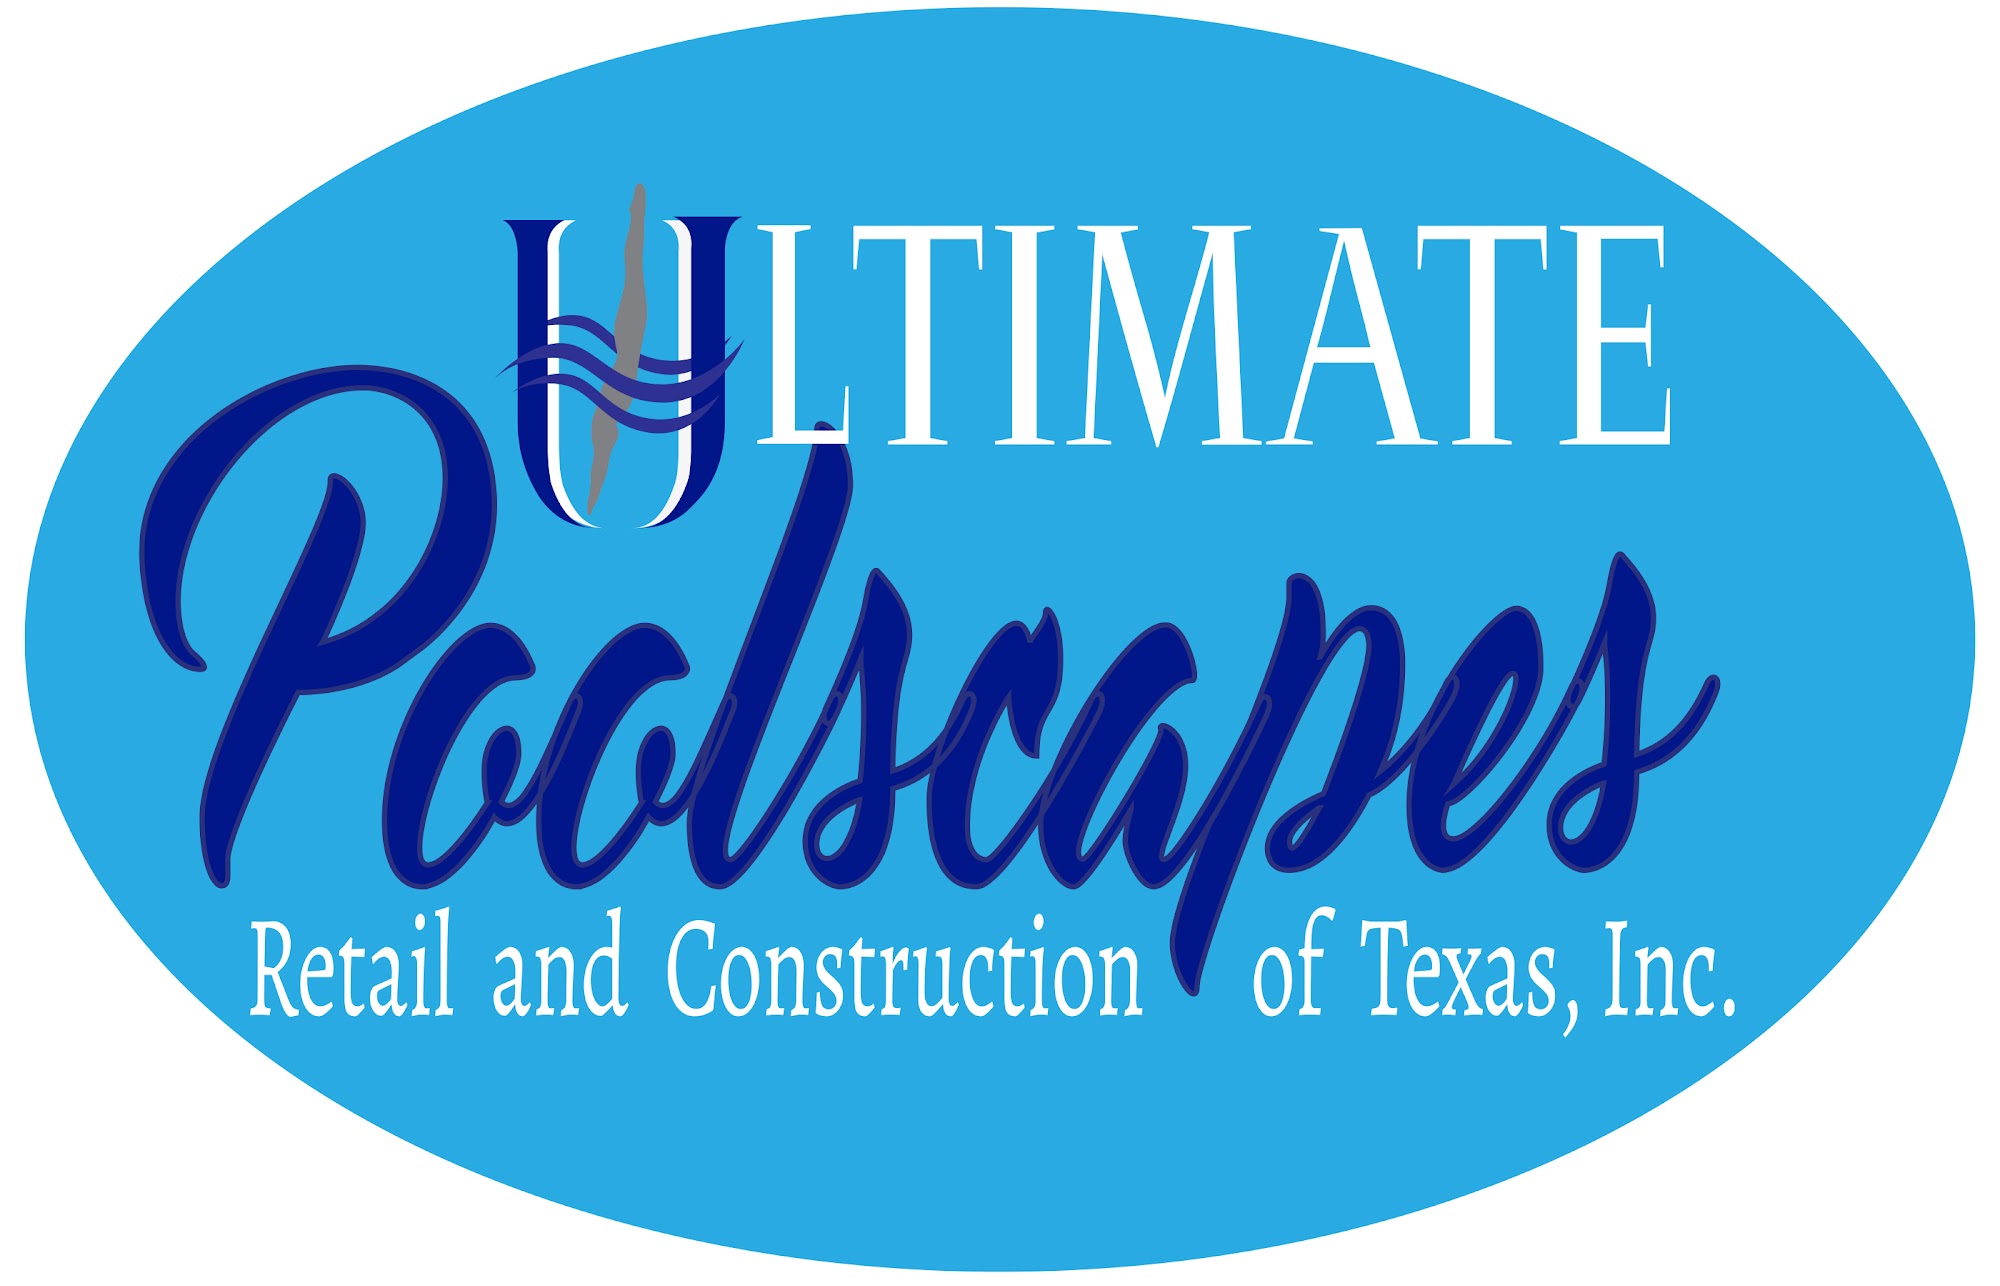 Ultimate Poolscapes of Texas, Inc. 22010 Woodway Dr, Woodway Texas 76712